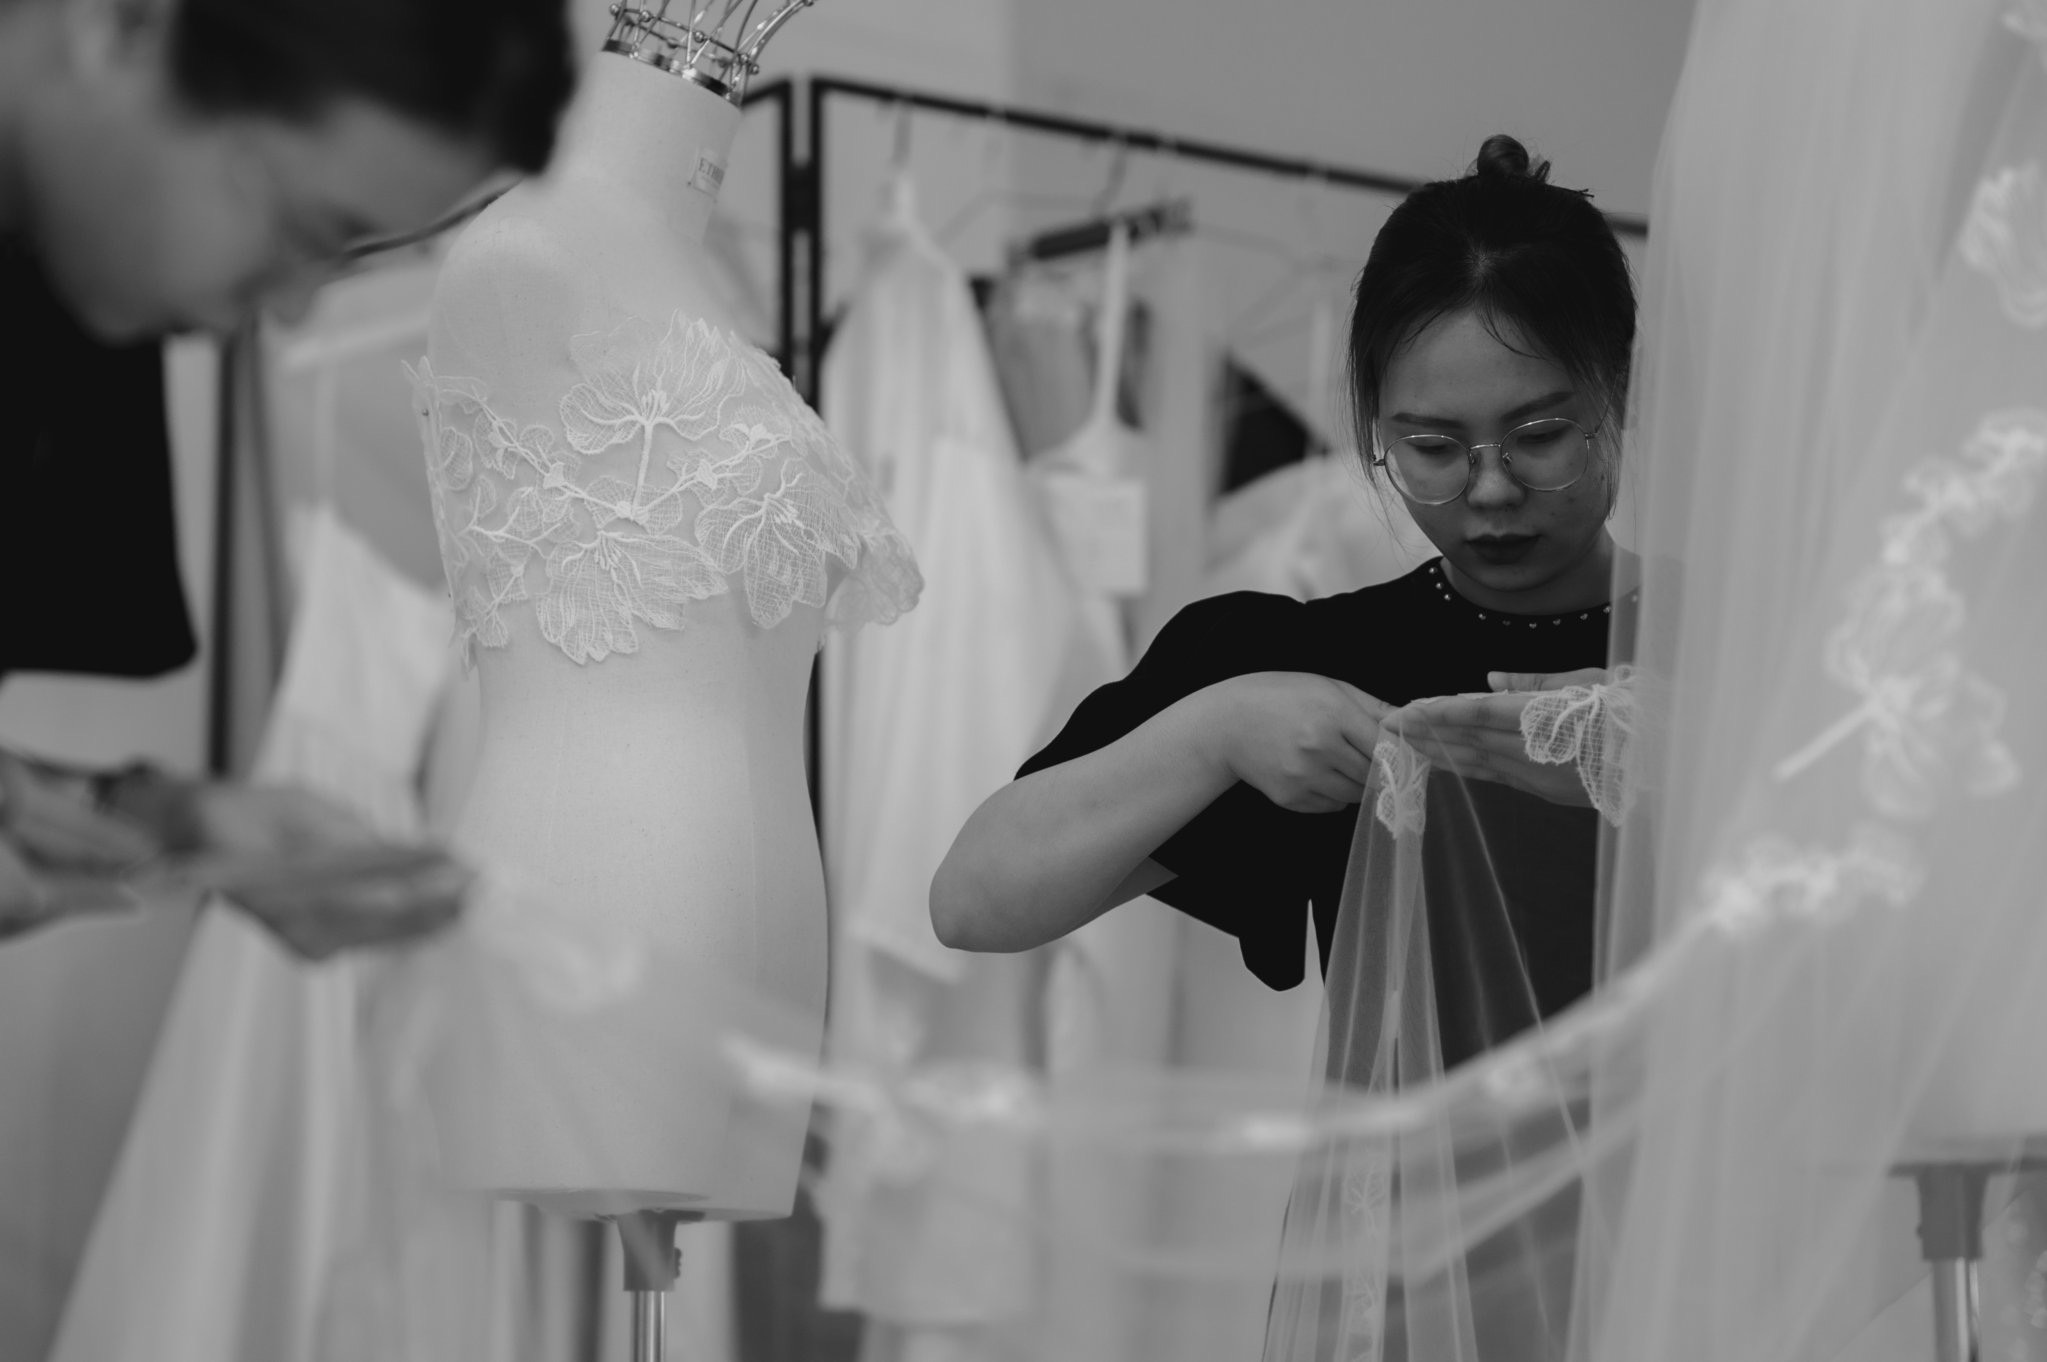 Ether Bridal pays attention to the smallest detail of every wedding dress